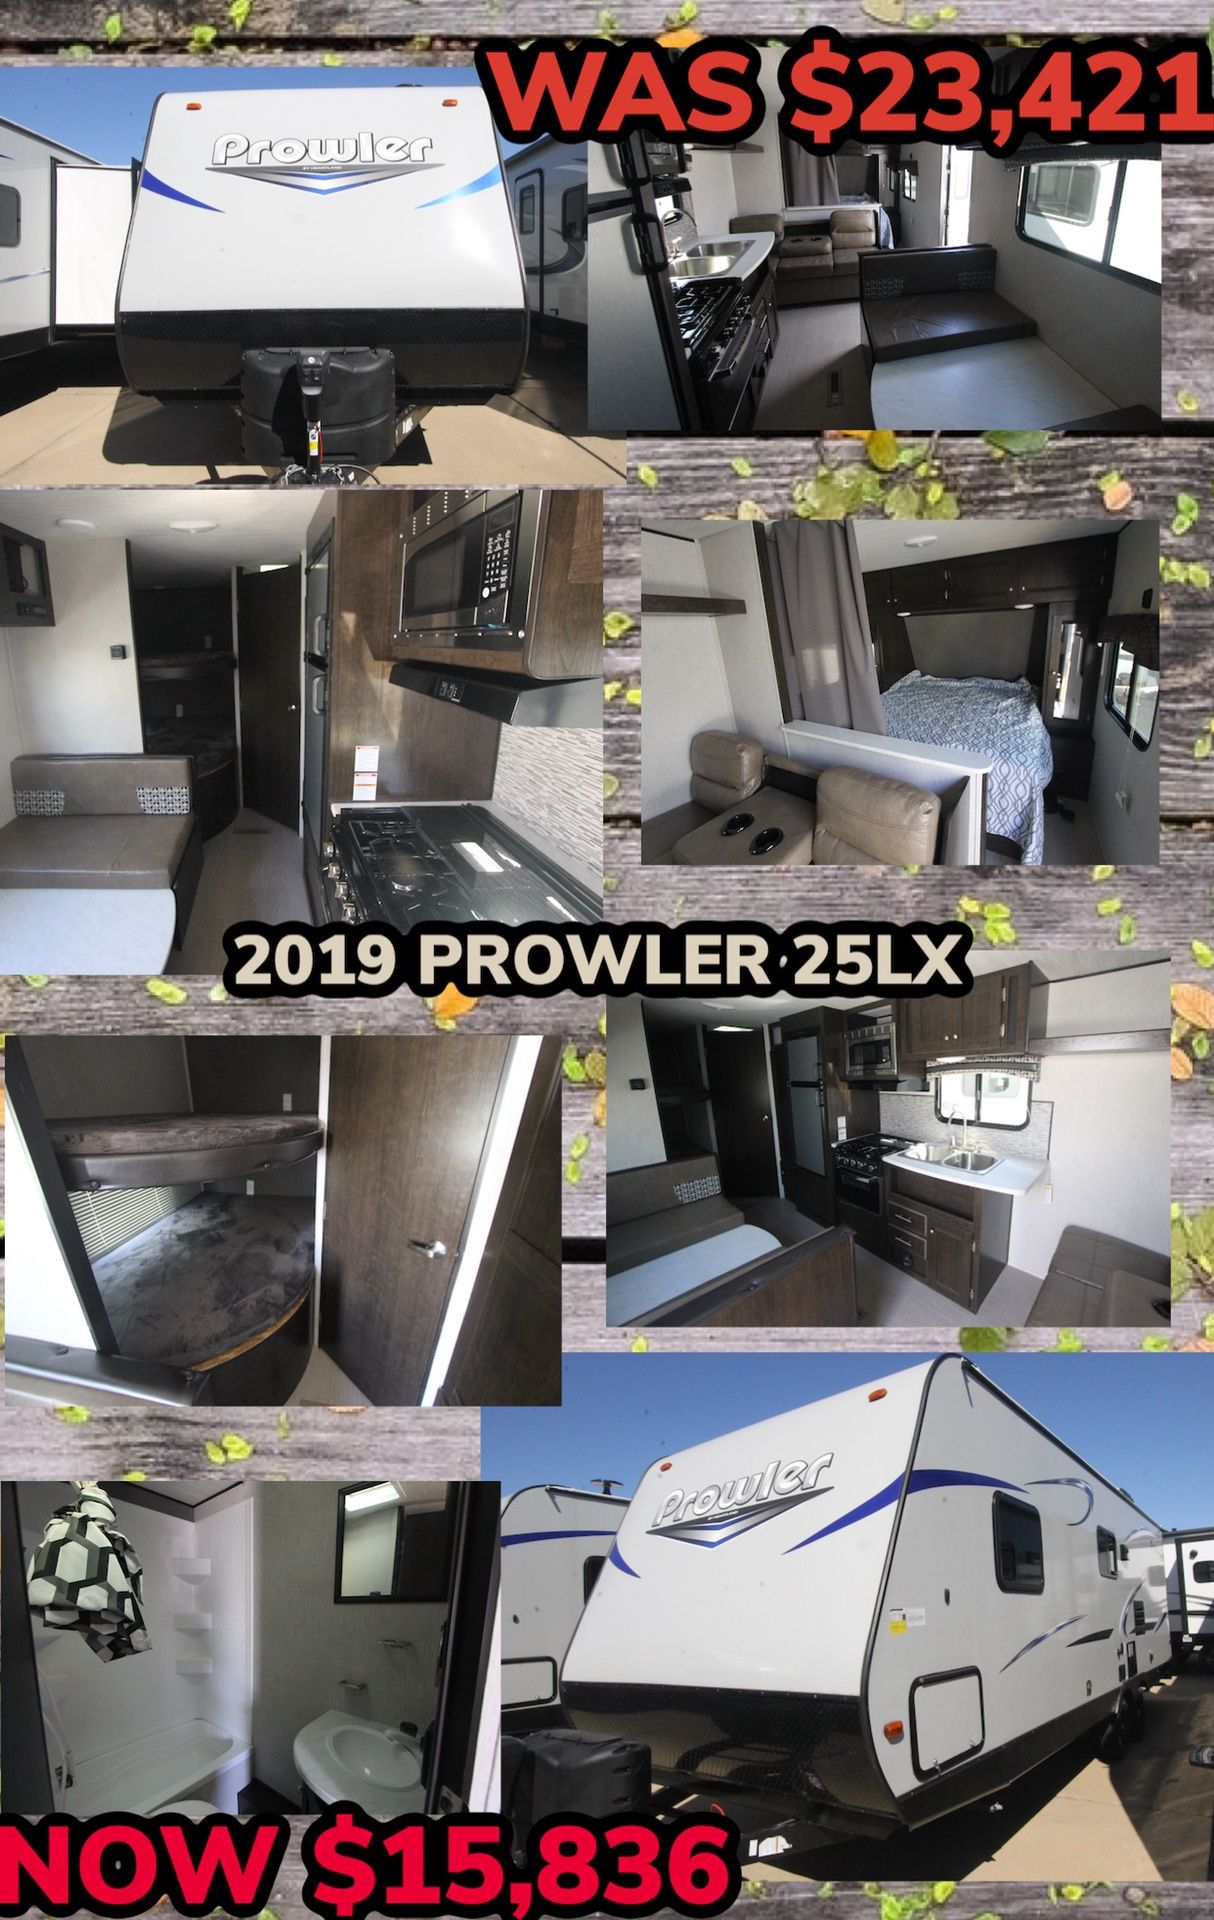 END OF THE YEAR CLEARANCE SALE!! 2019 PROWLER 25LX